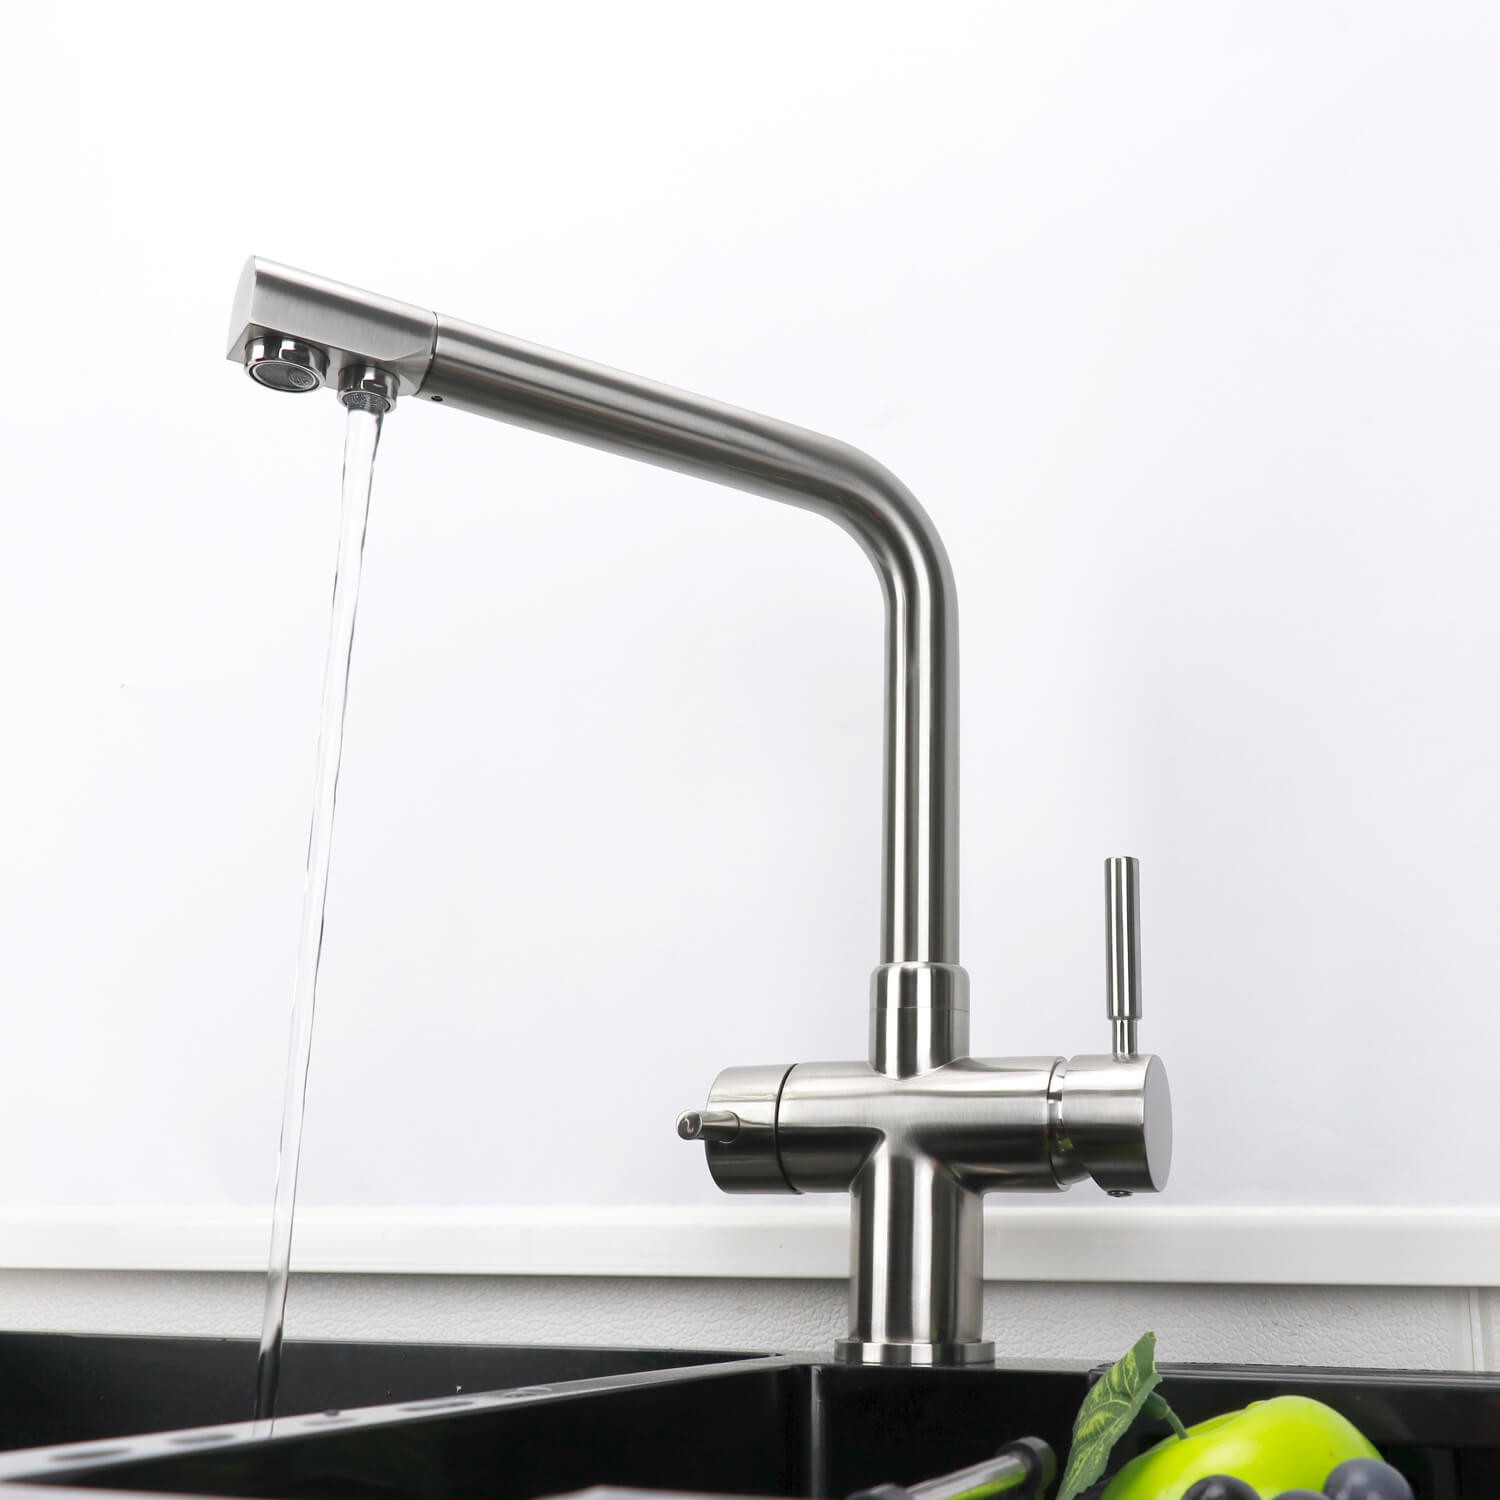 Matt Black 5 Way Faucet Chilled And Soda Filter Water Tap